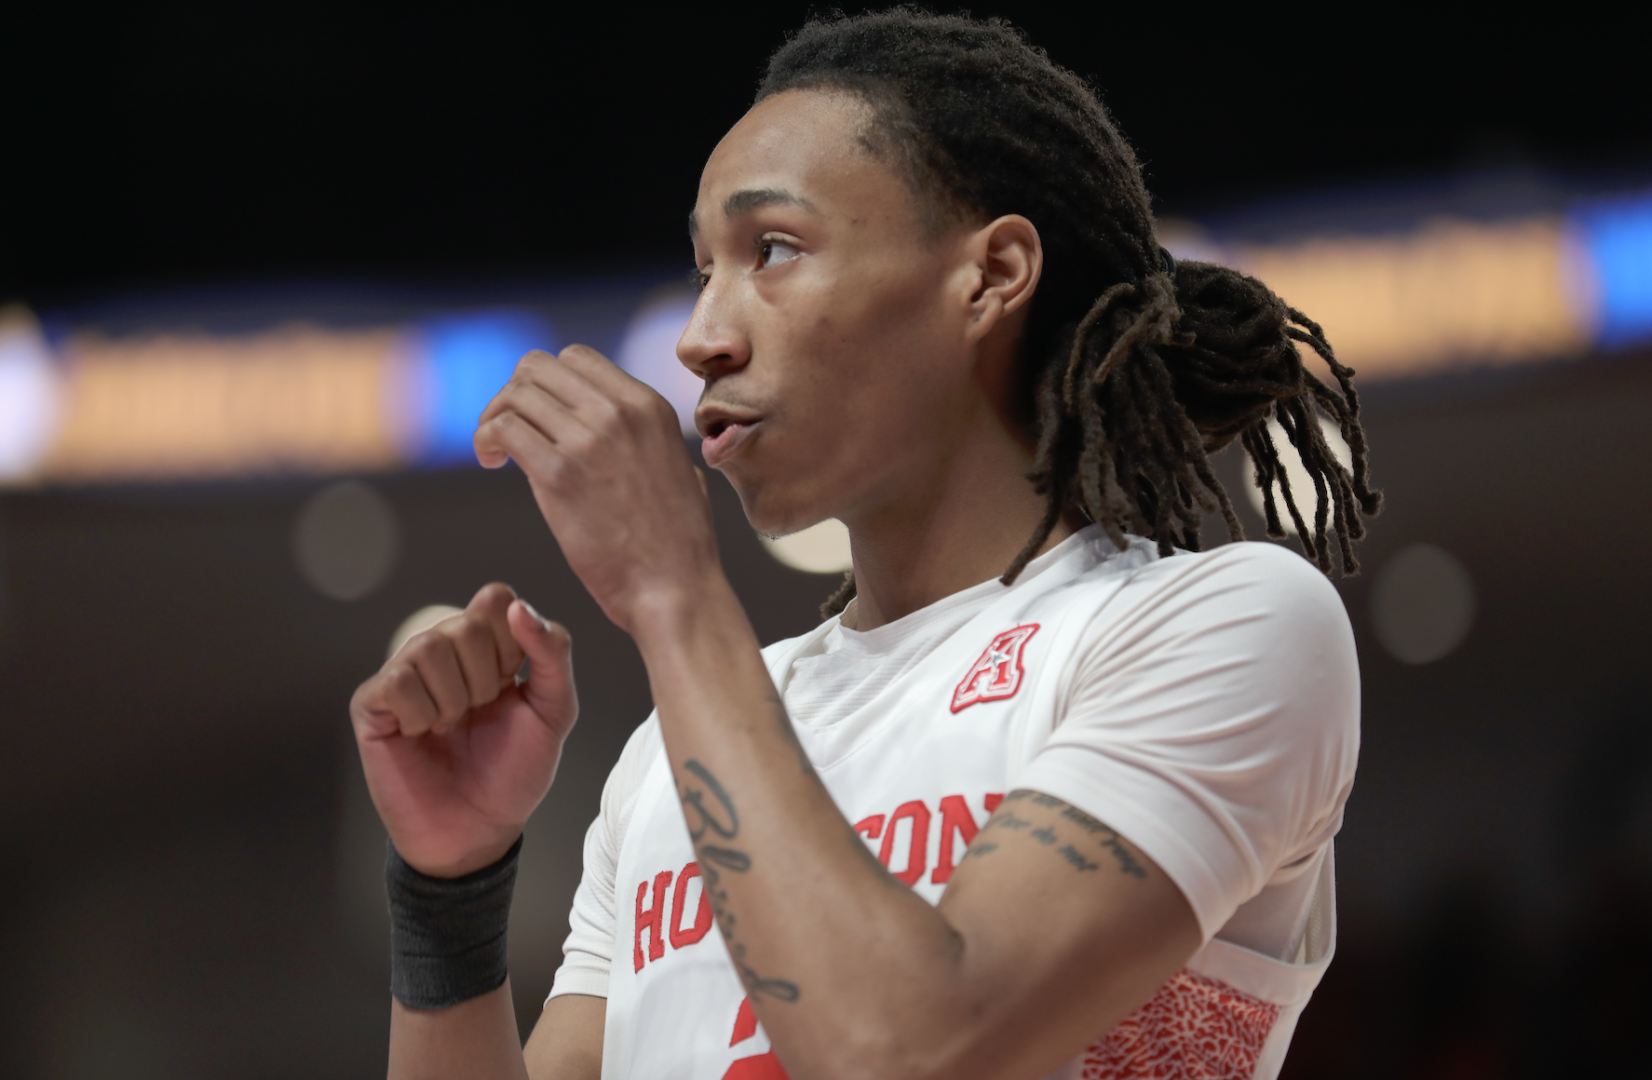 Guard Caleb Mills is one of two freshmen in the American Athletic Conference to be named to the All-AAC first or second team after leading Houston in scoring during the regular season with a 13.2 points per game average. | Mikol Kindle Jr./The Cougar